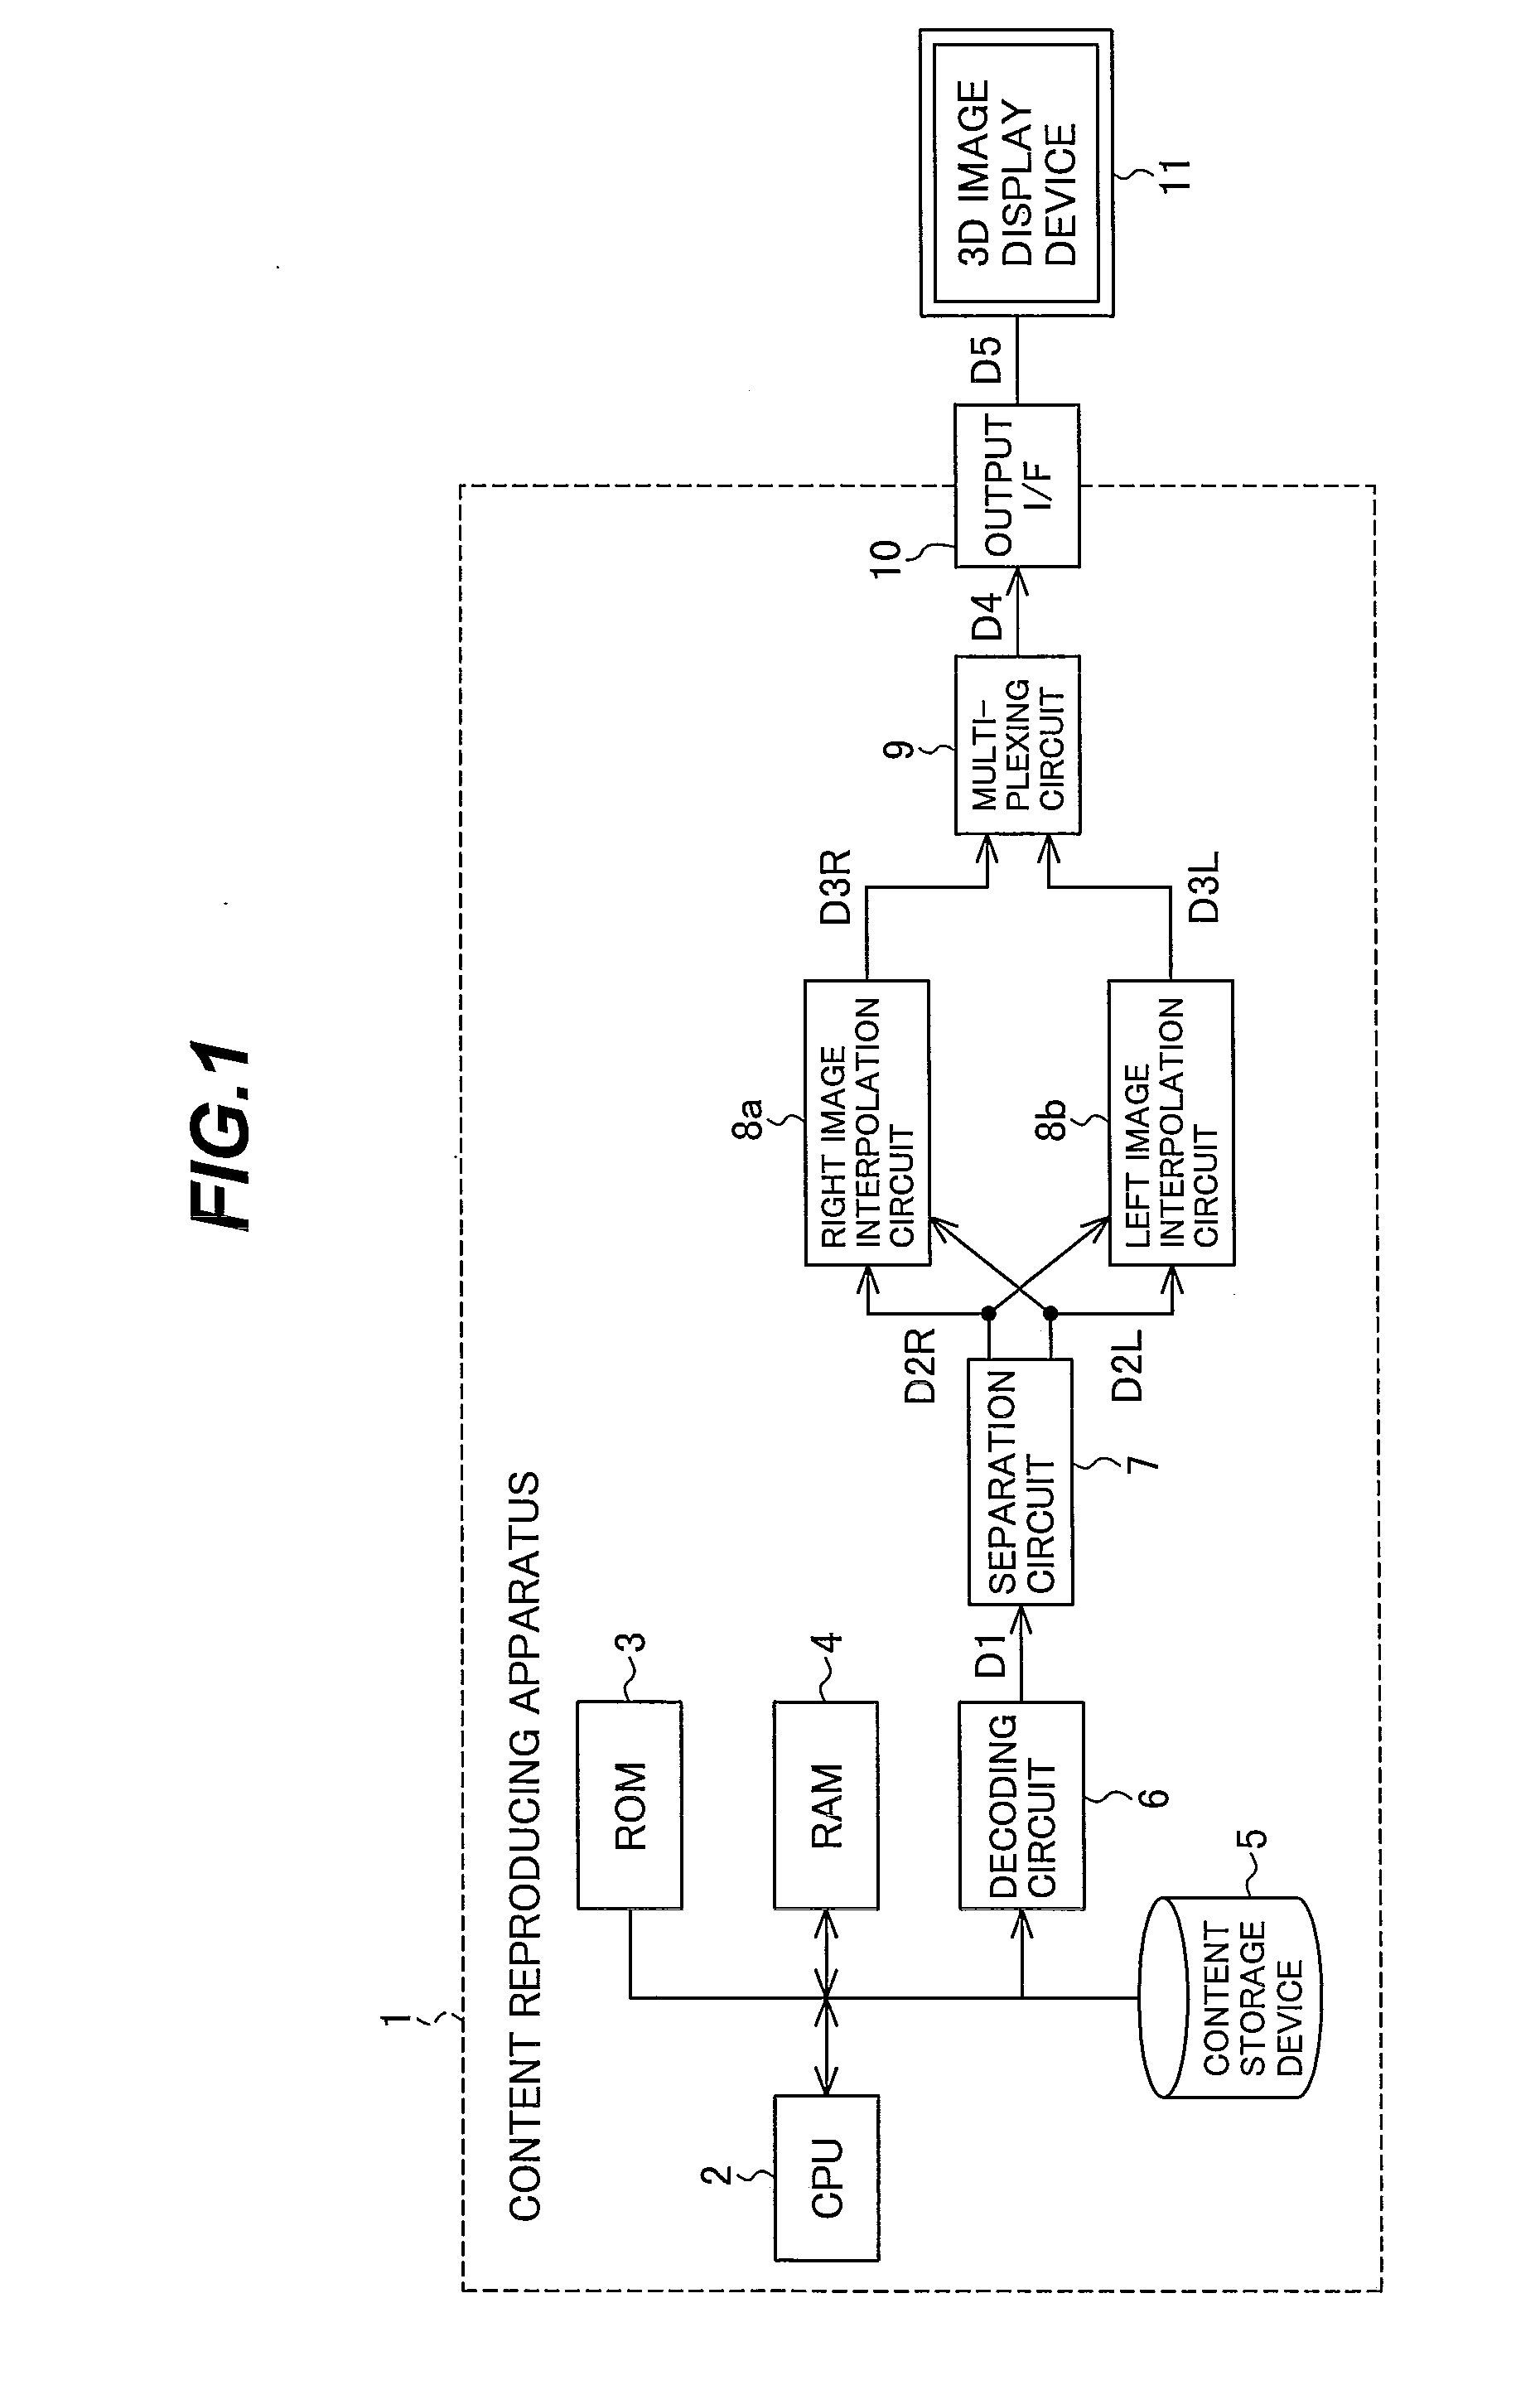 Content reproducing apparatus and method